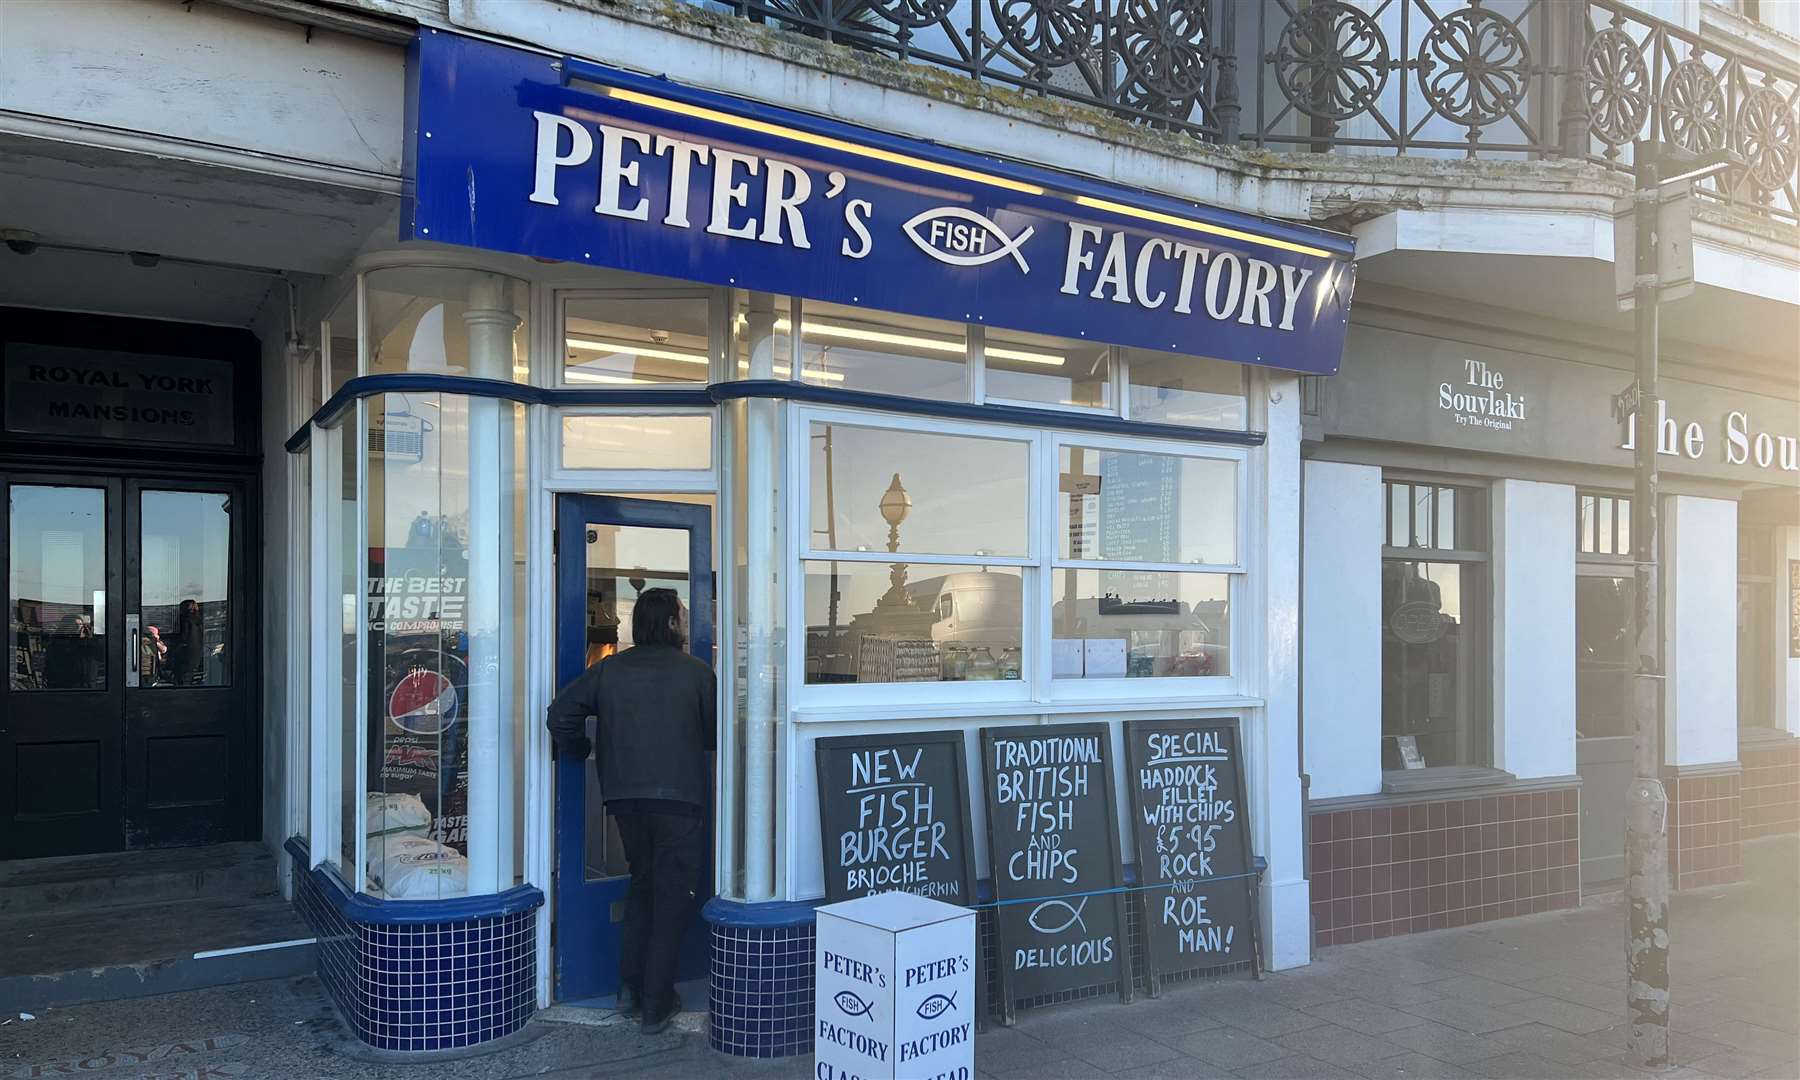 A rare sight - Peter's Fish Factory without an enormous queue